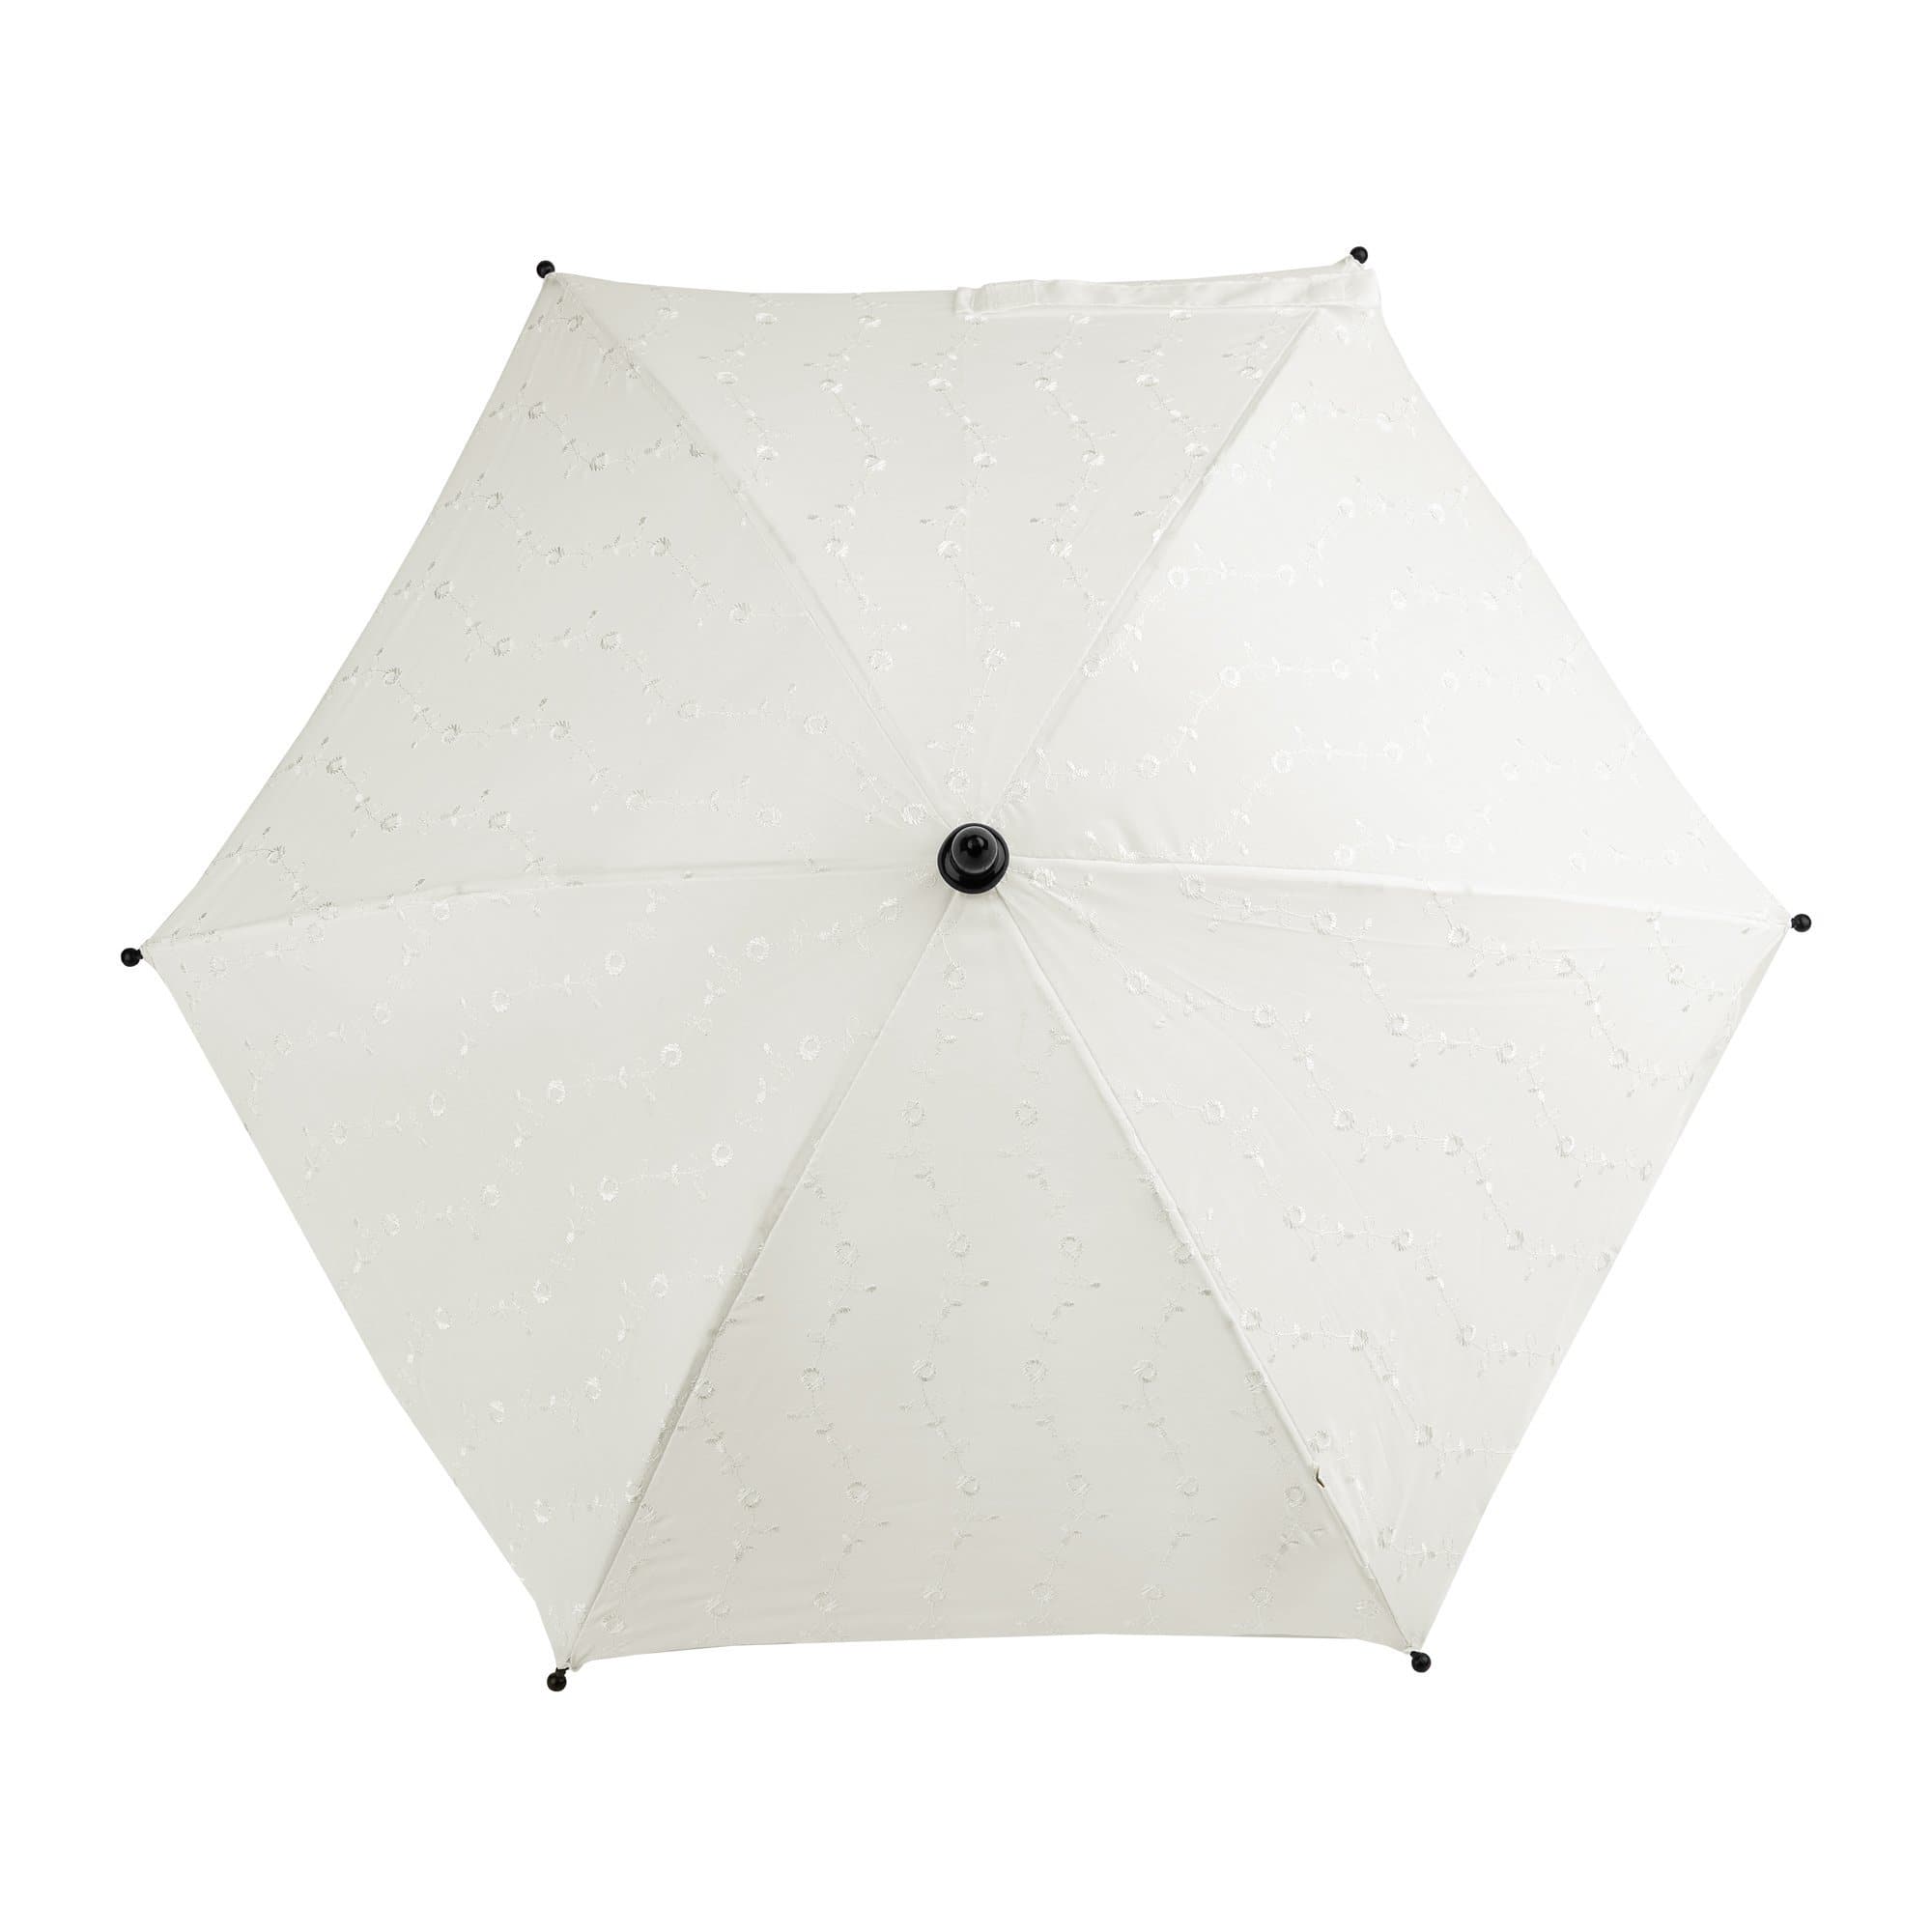 Broderie Anglaise Parasol Compatible with Babyzen - For Your Little One